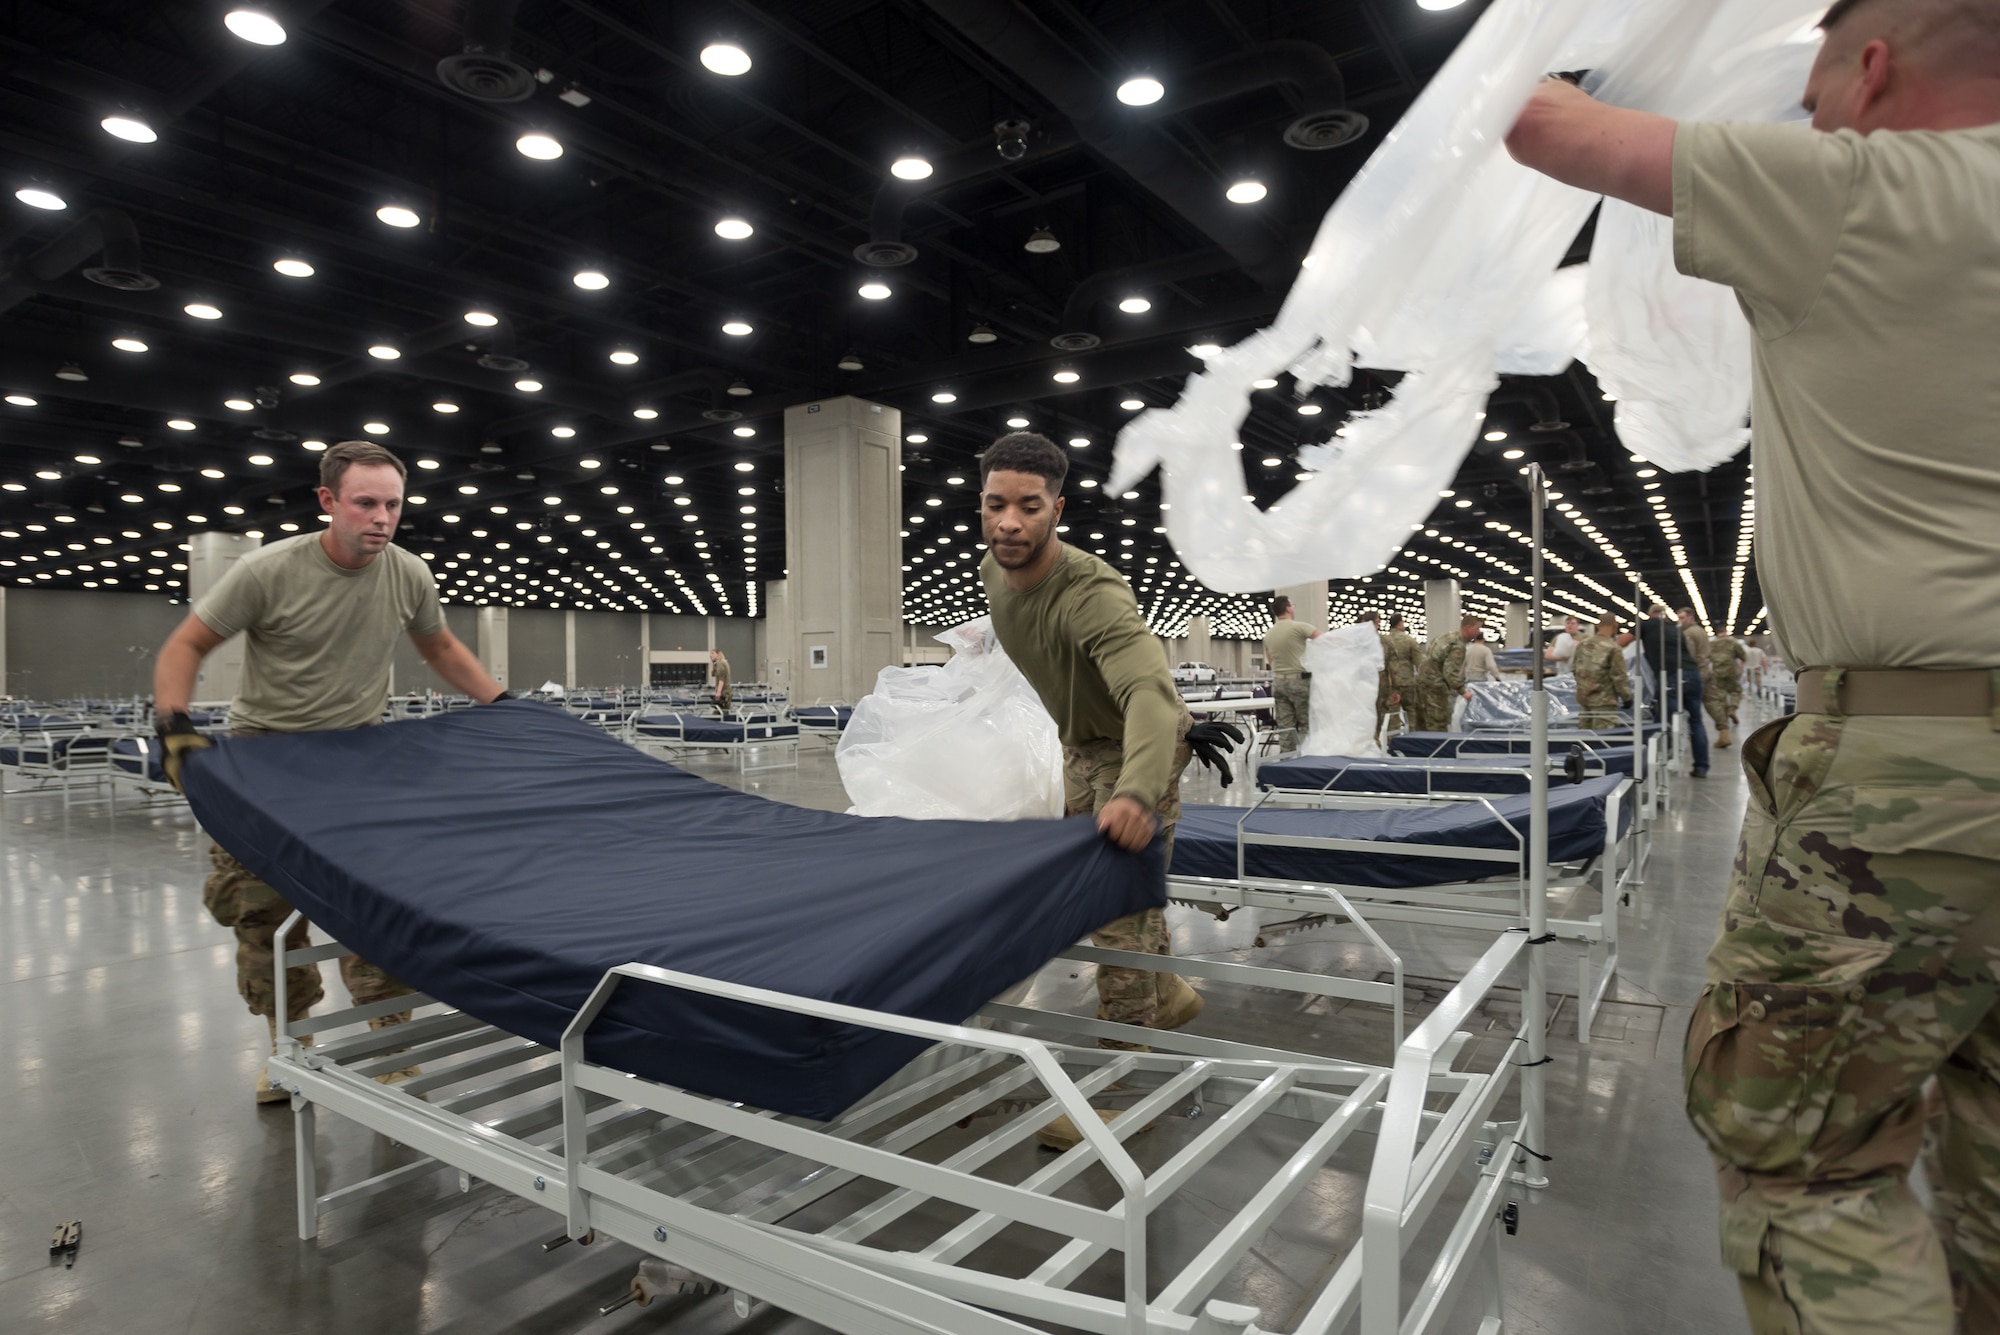 Staff Sgt. Wesley Hack (left) and Senior Airman Trenton Curry (center) of the Kentucky Air National Guard's 123rd Civil Engineer Squadron place a mattress on a hospital bed at the Kentucky Fair and Exposition Center in Louisville, Ky., April 11, 2020. The site, which is expected to be operational April 15, will serve as an Alternate Care Facility for patients suffering from COVID-19 if area hospitals exceed available capacity. The location initially can treat up to 288 patients and is scalable to 2,000 beds. (U.S. Air National Guard photo by Dale Greer)